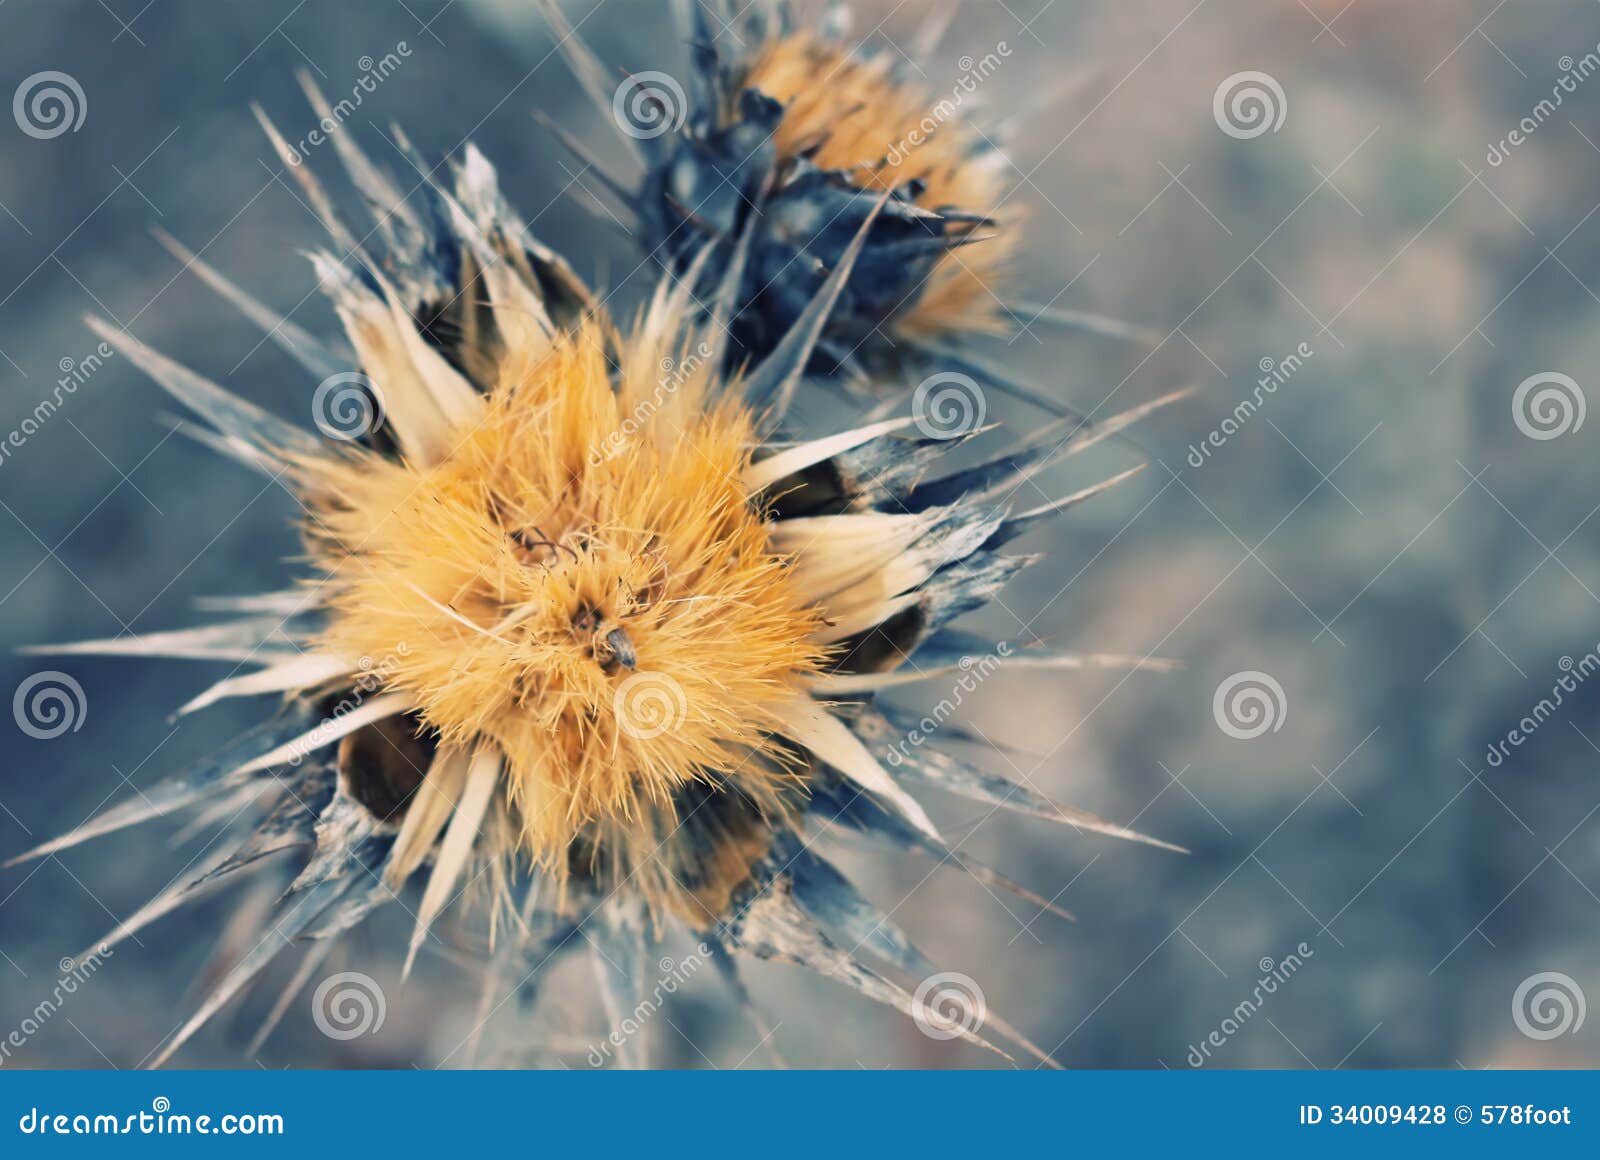 Thistle stock photo. Image of stem, floral, delicacy - 34009428